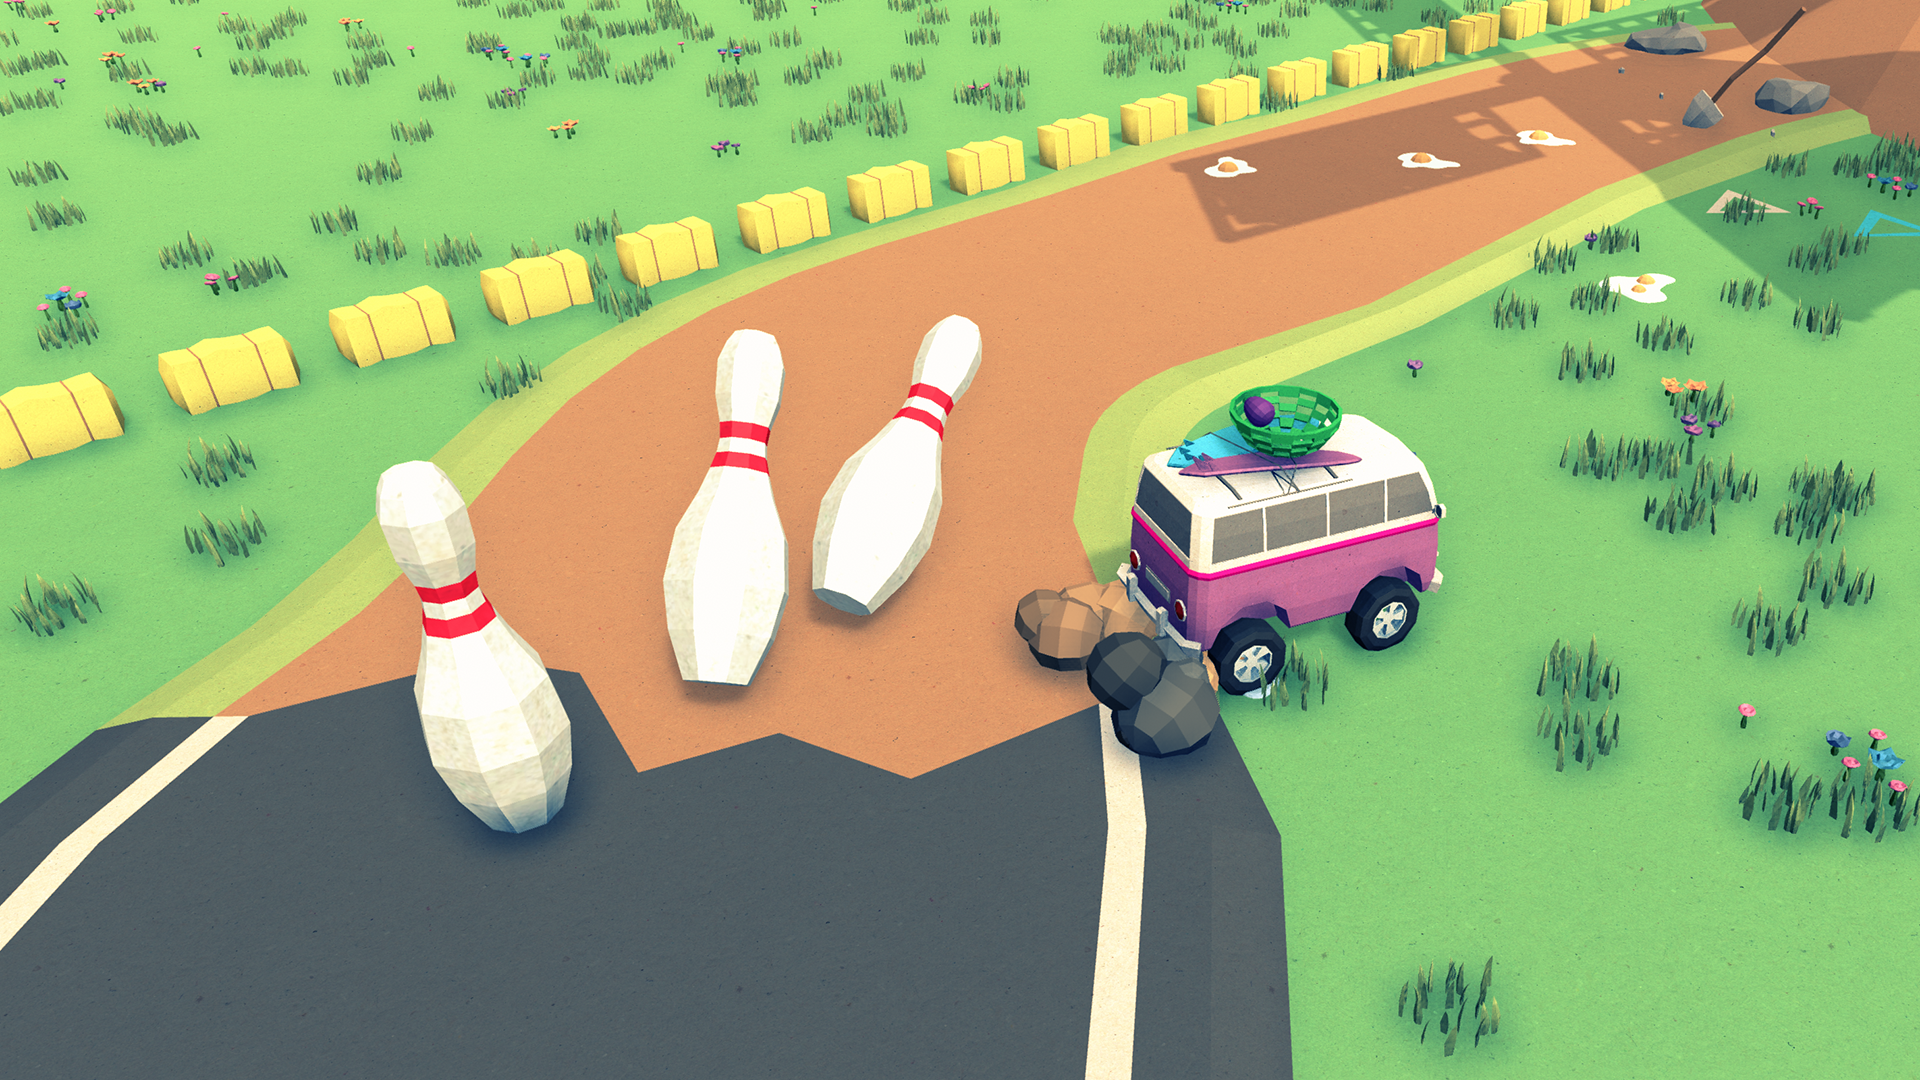 004_surfing_bus_goes_bowling.png